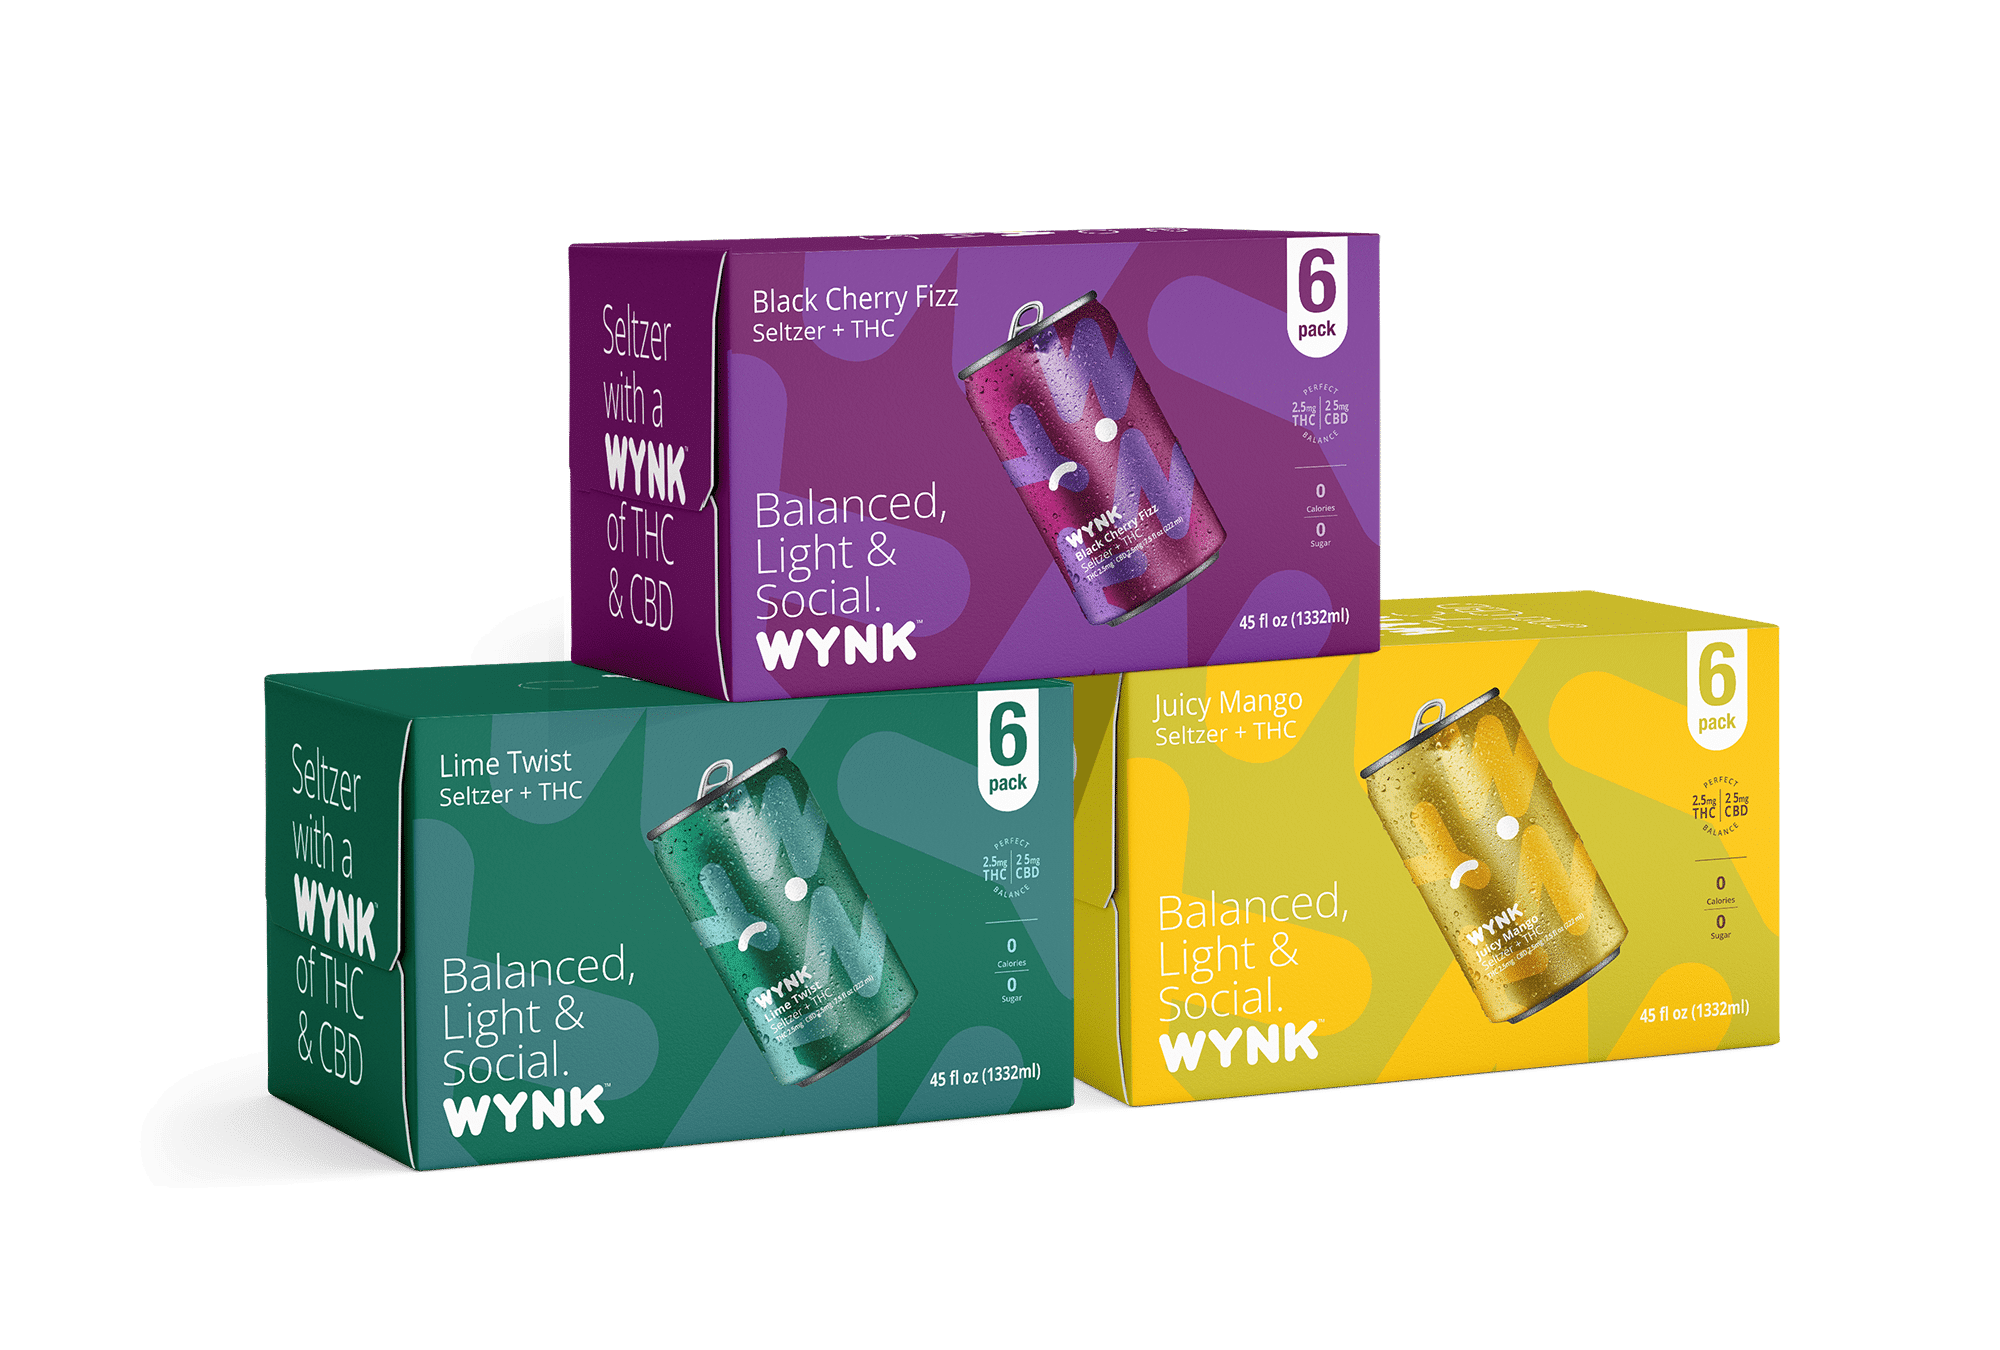 Assorted WYNK THC Seltzer packs featuring Lime Twist, Black Cherry Fizz, and Juicy Mango flavors, a microdose thc and cannabidiol drink option for a healthy alcohol alternative to relax.